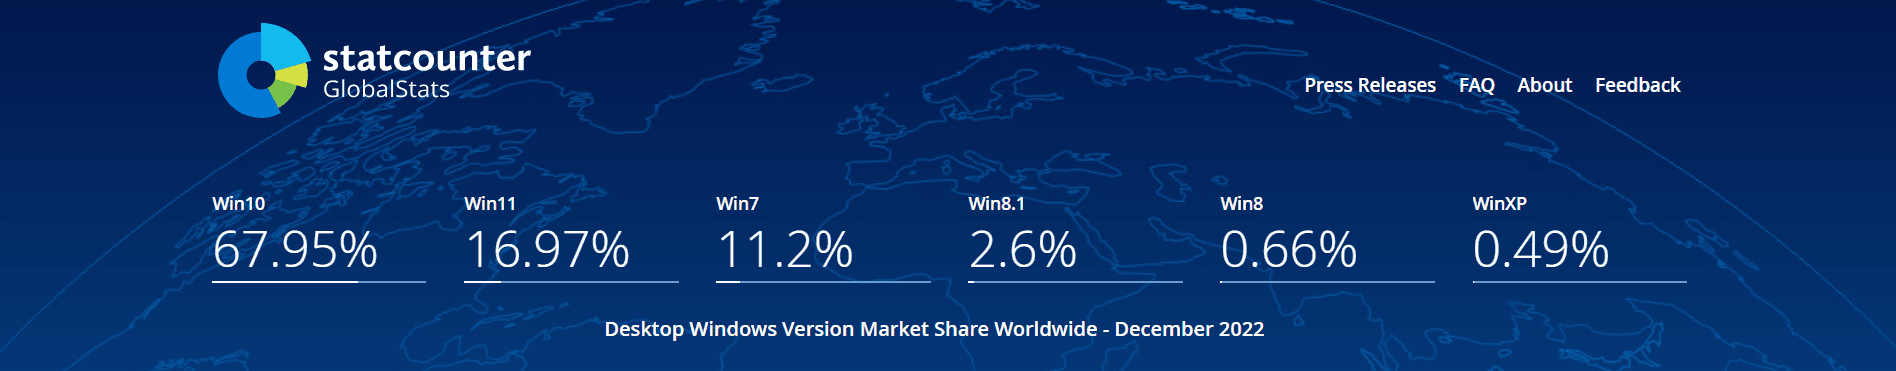 A screenshot of the Windows version market share in December 2022. Data provided by Statcounter.